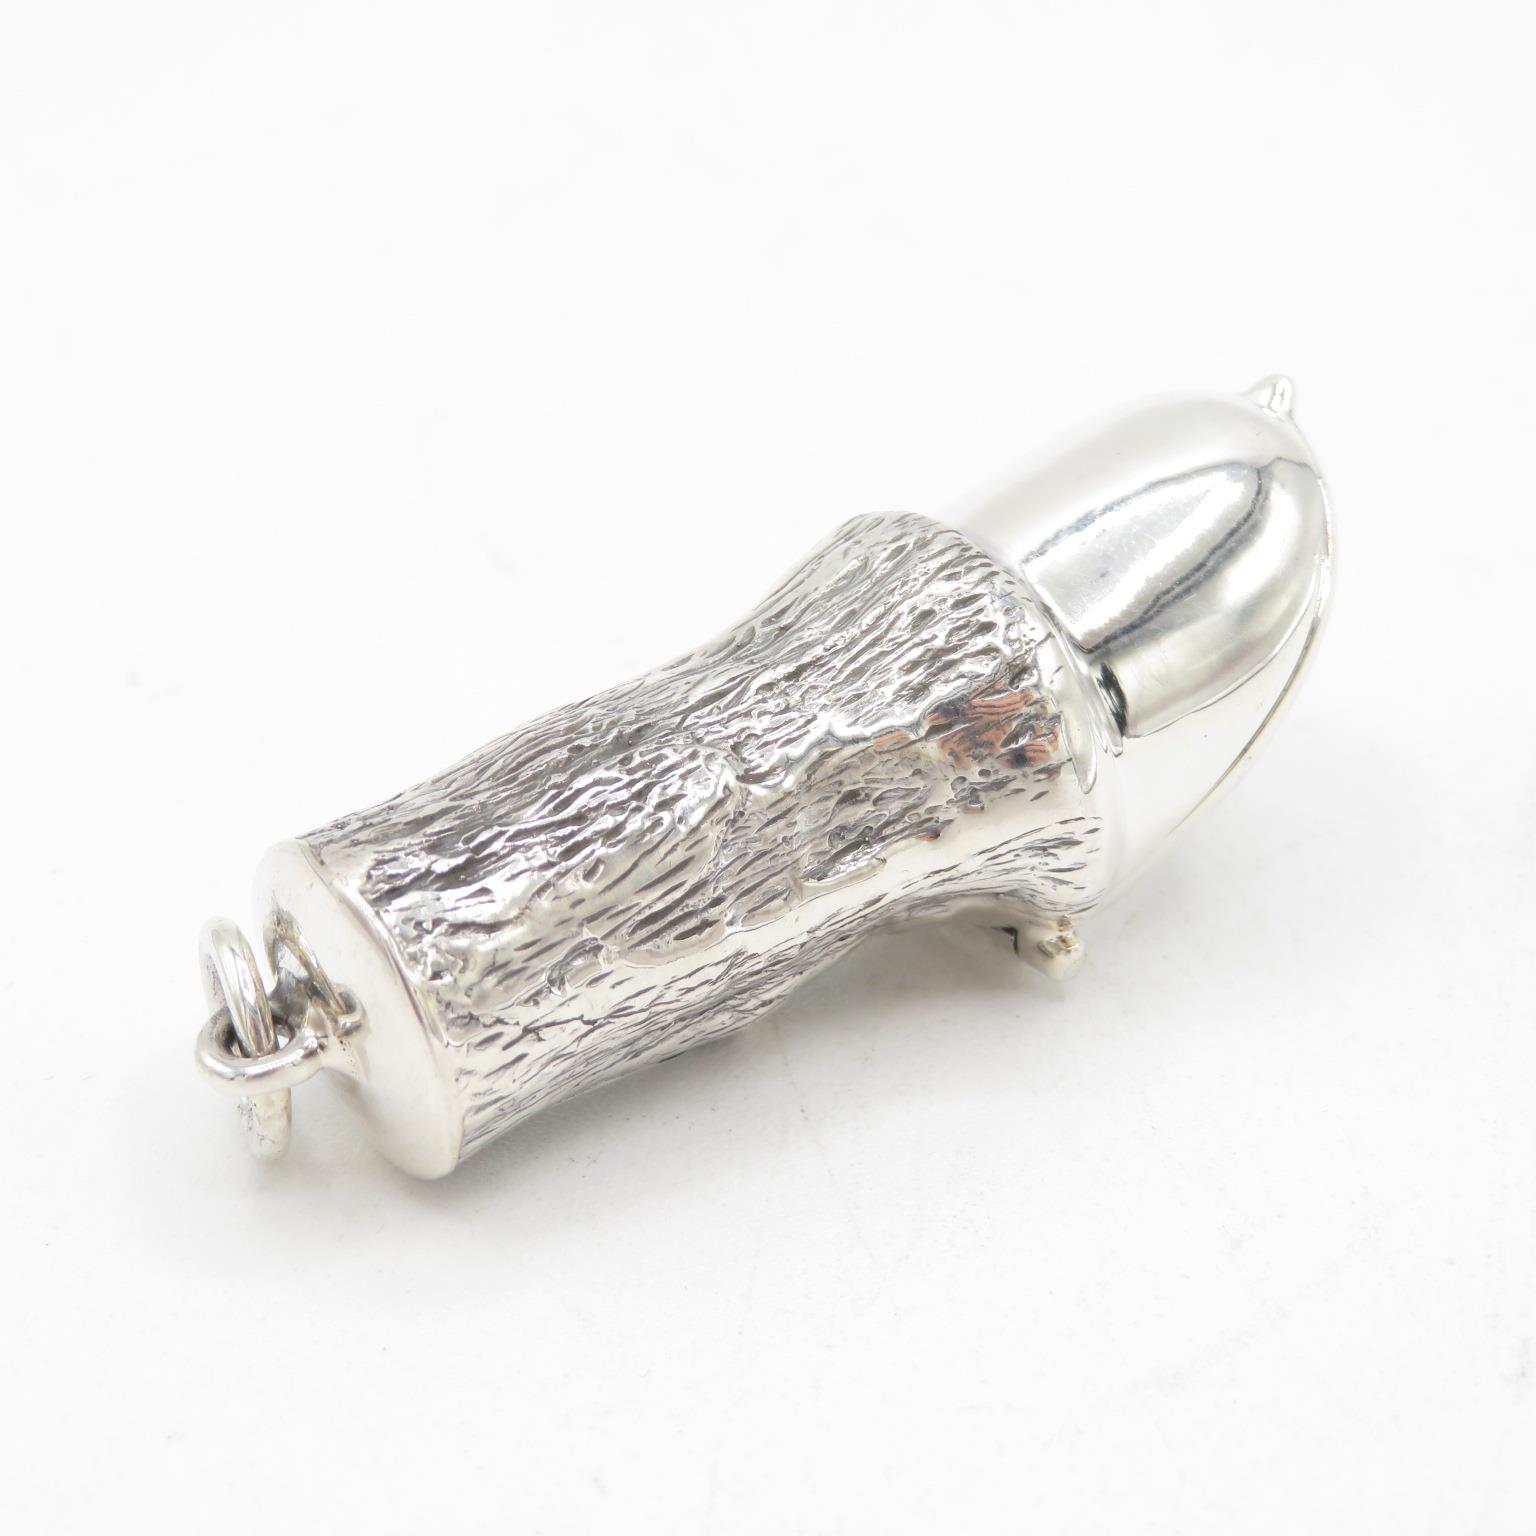 Horse's leg and hoof HM 925 Sterling Silver Vesta in excellent condition with tight closing hinged - Image 2 of 5